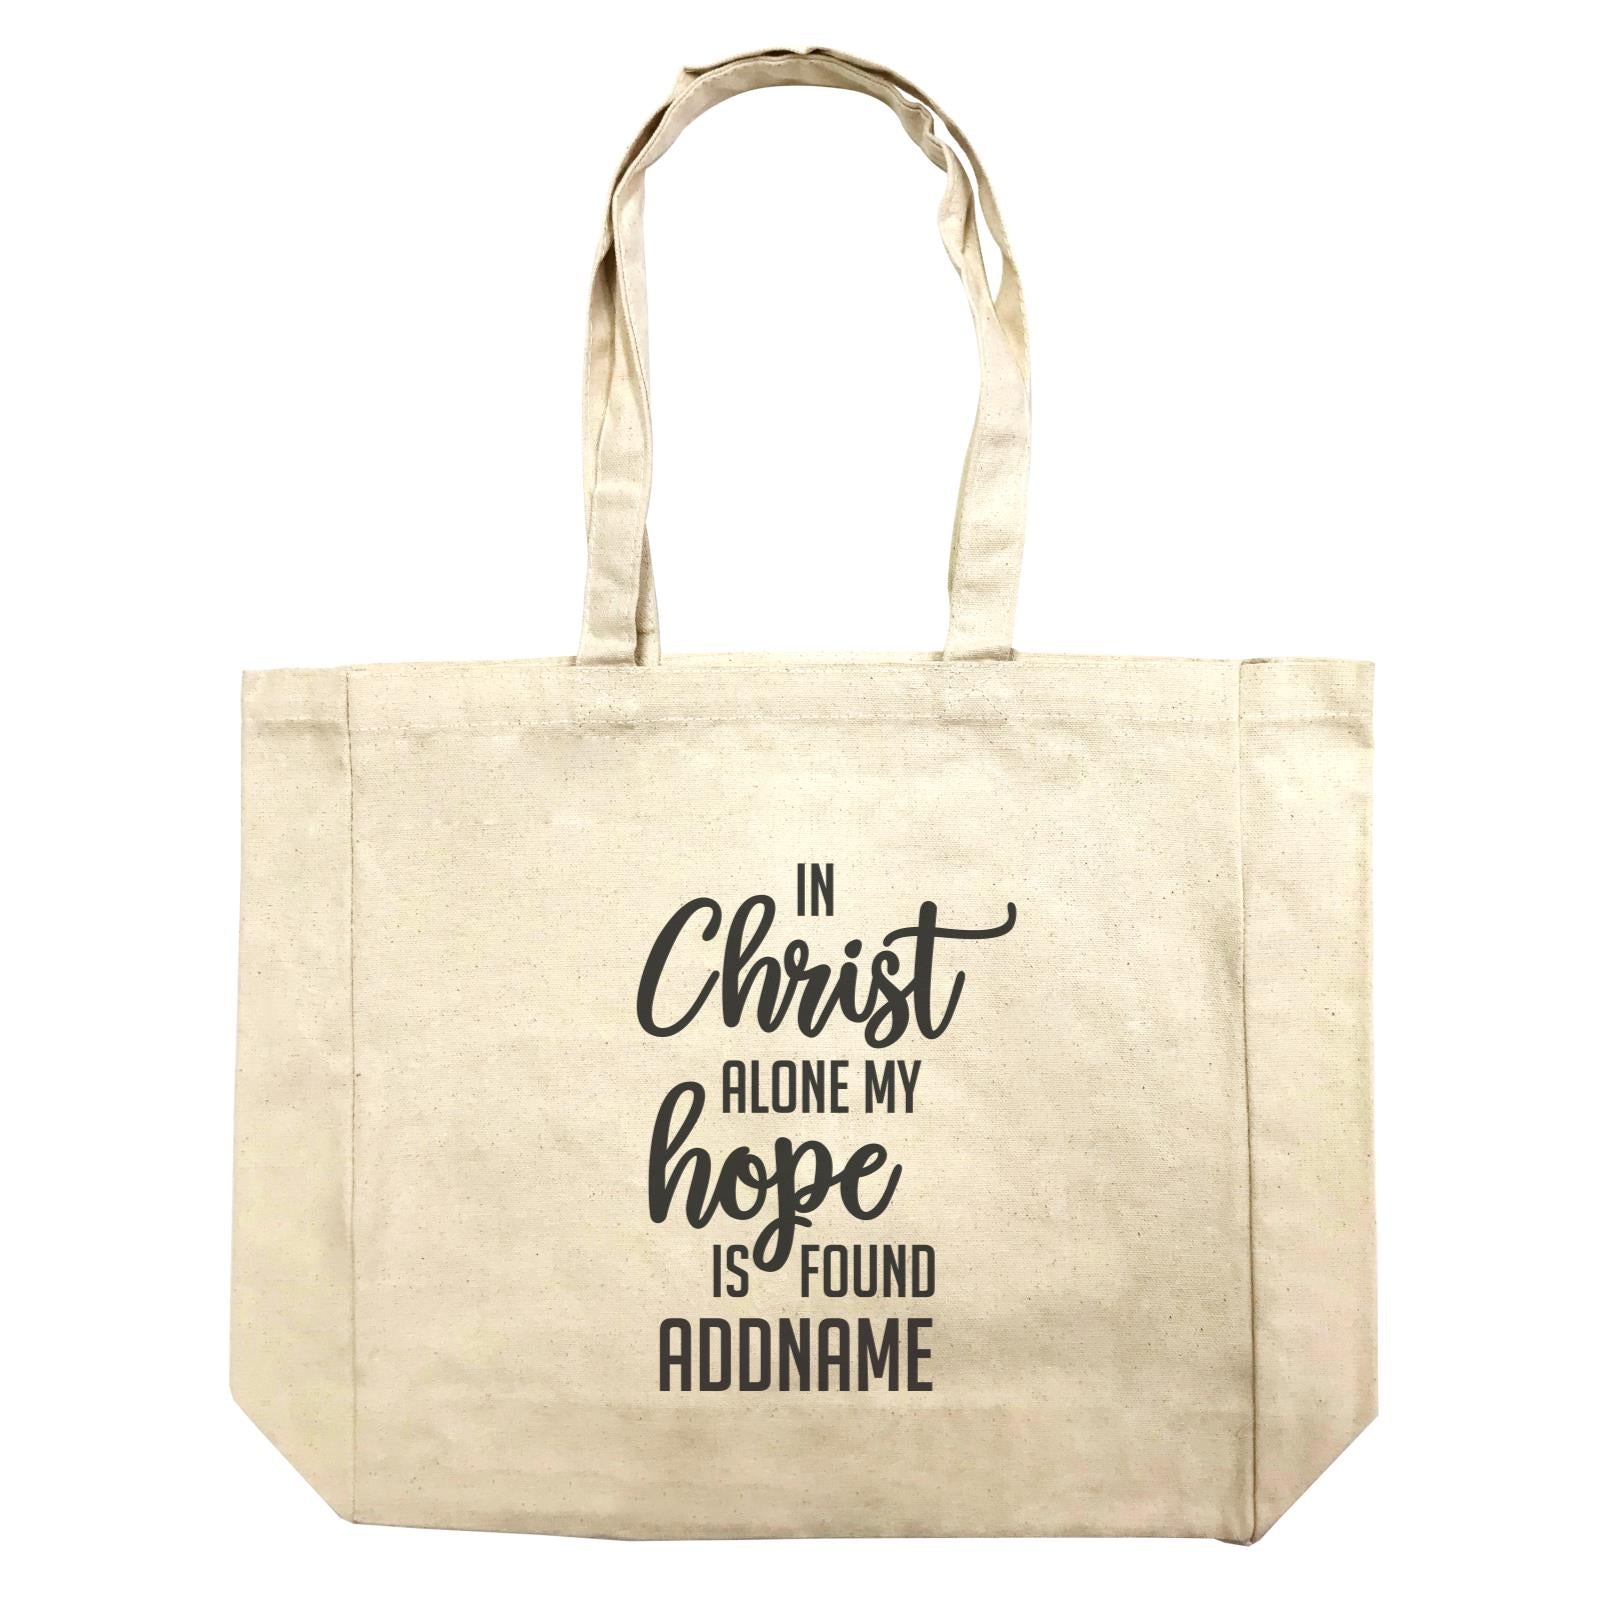 Christian Series In Christ Alone My Hope Is Found Addname Shopping Bag